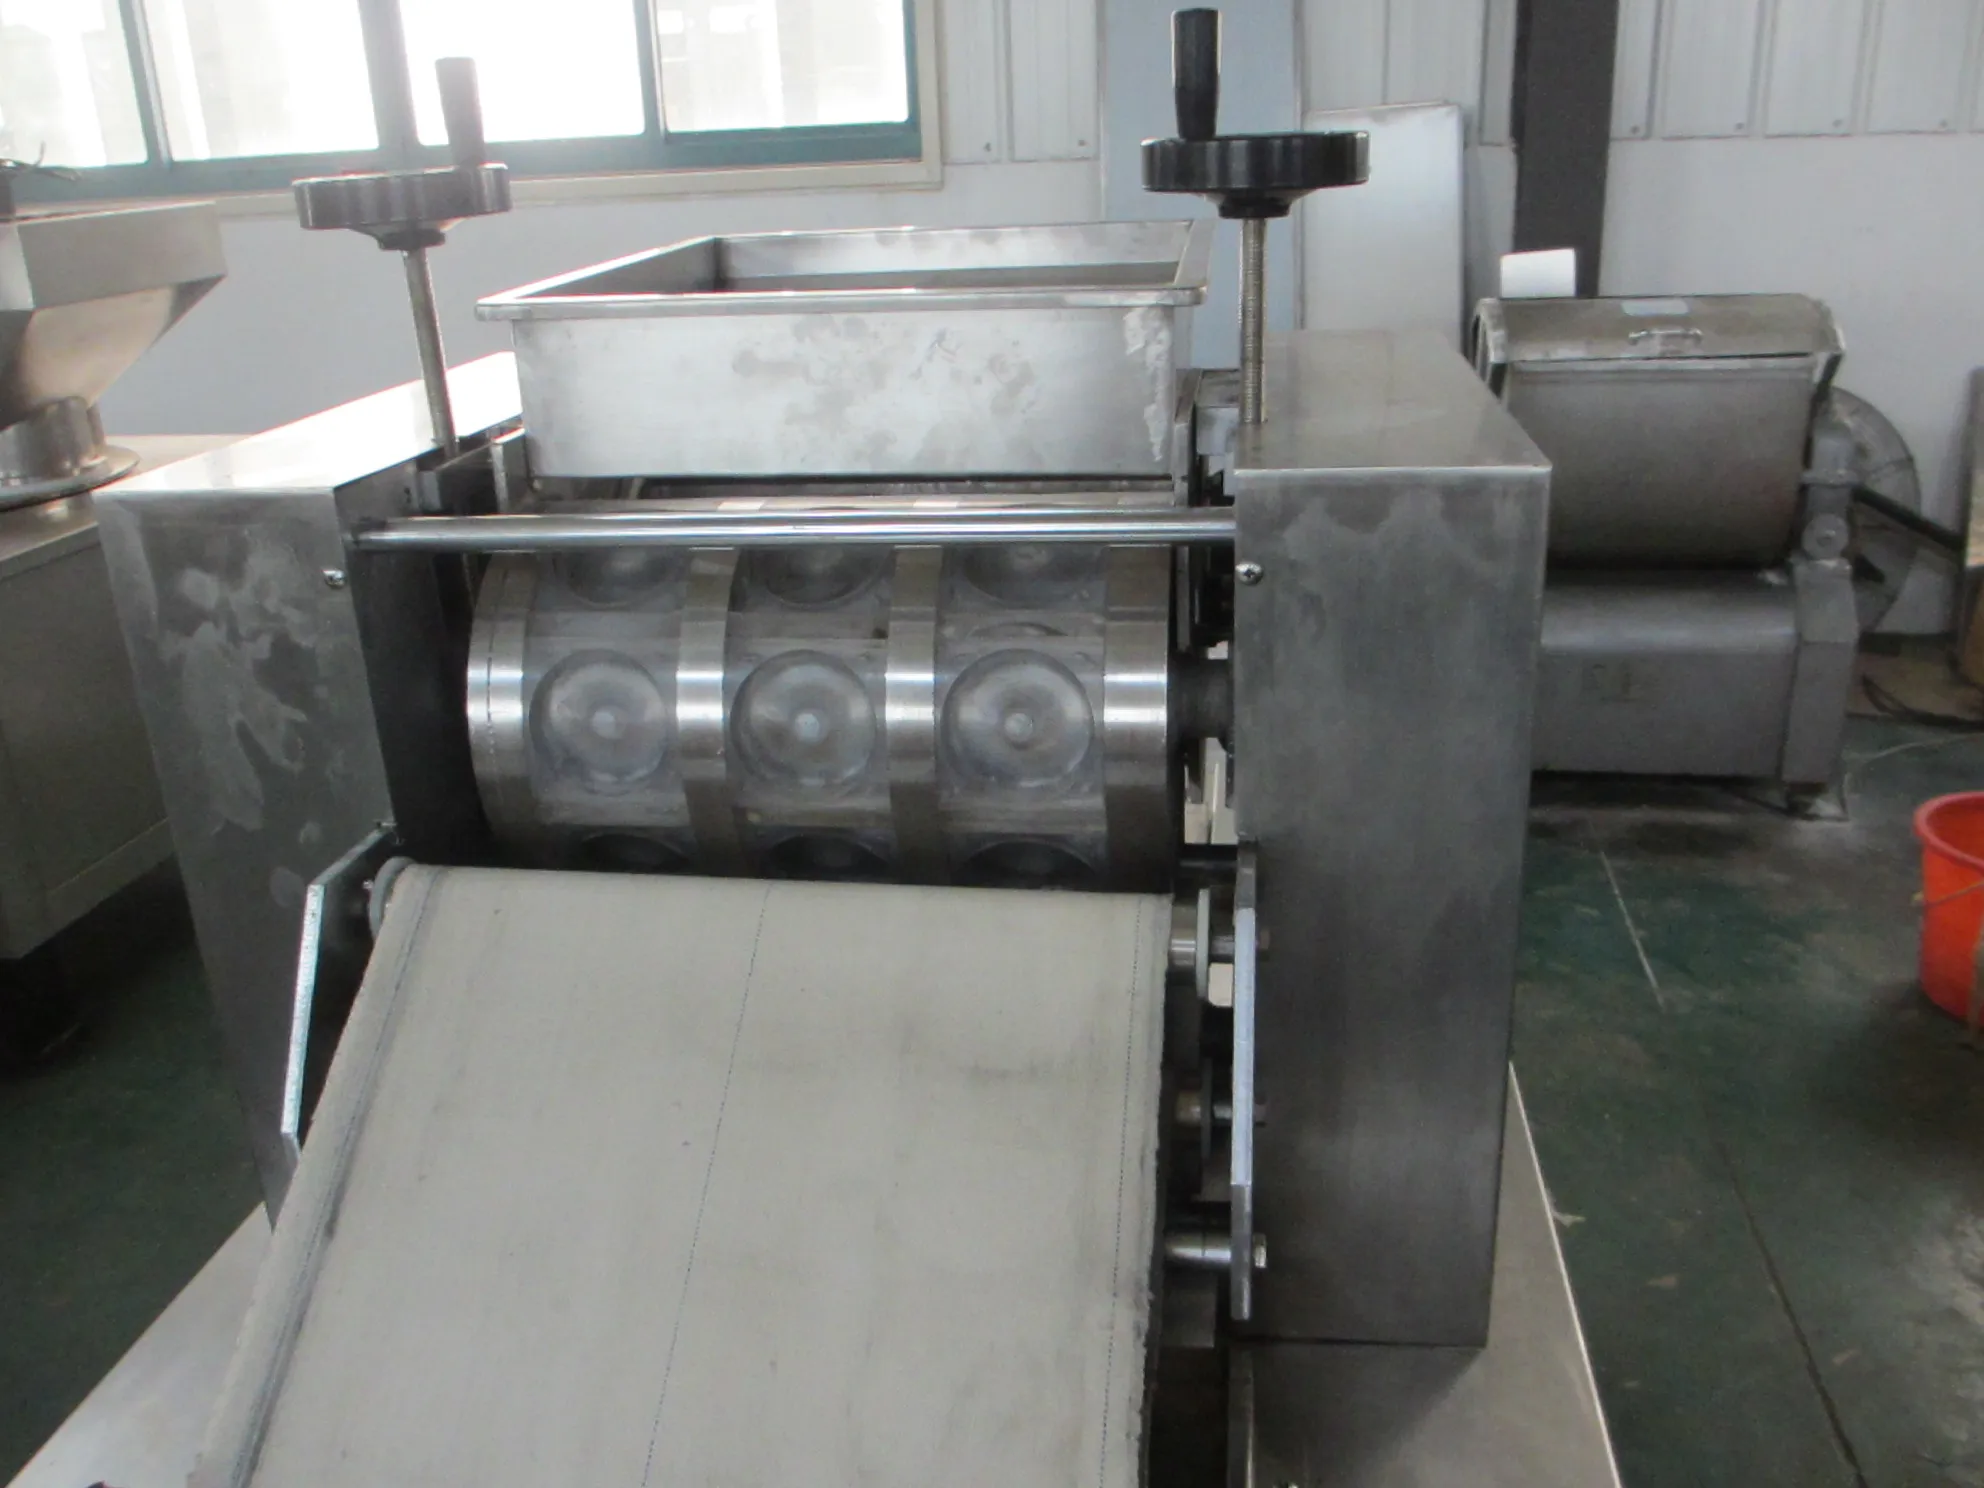 Automatic Cracker Machine And Soda Production Line With Good Quality And Price